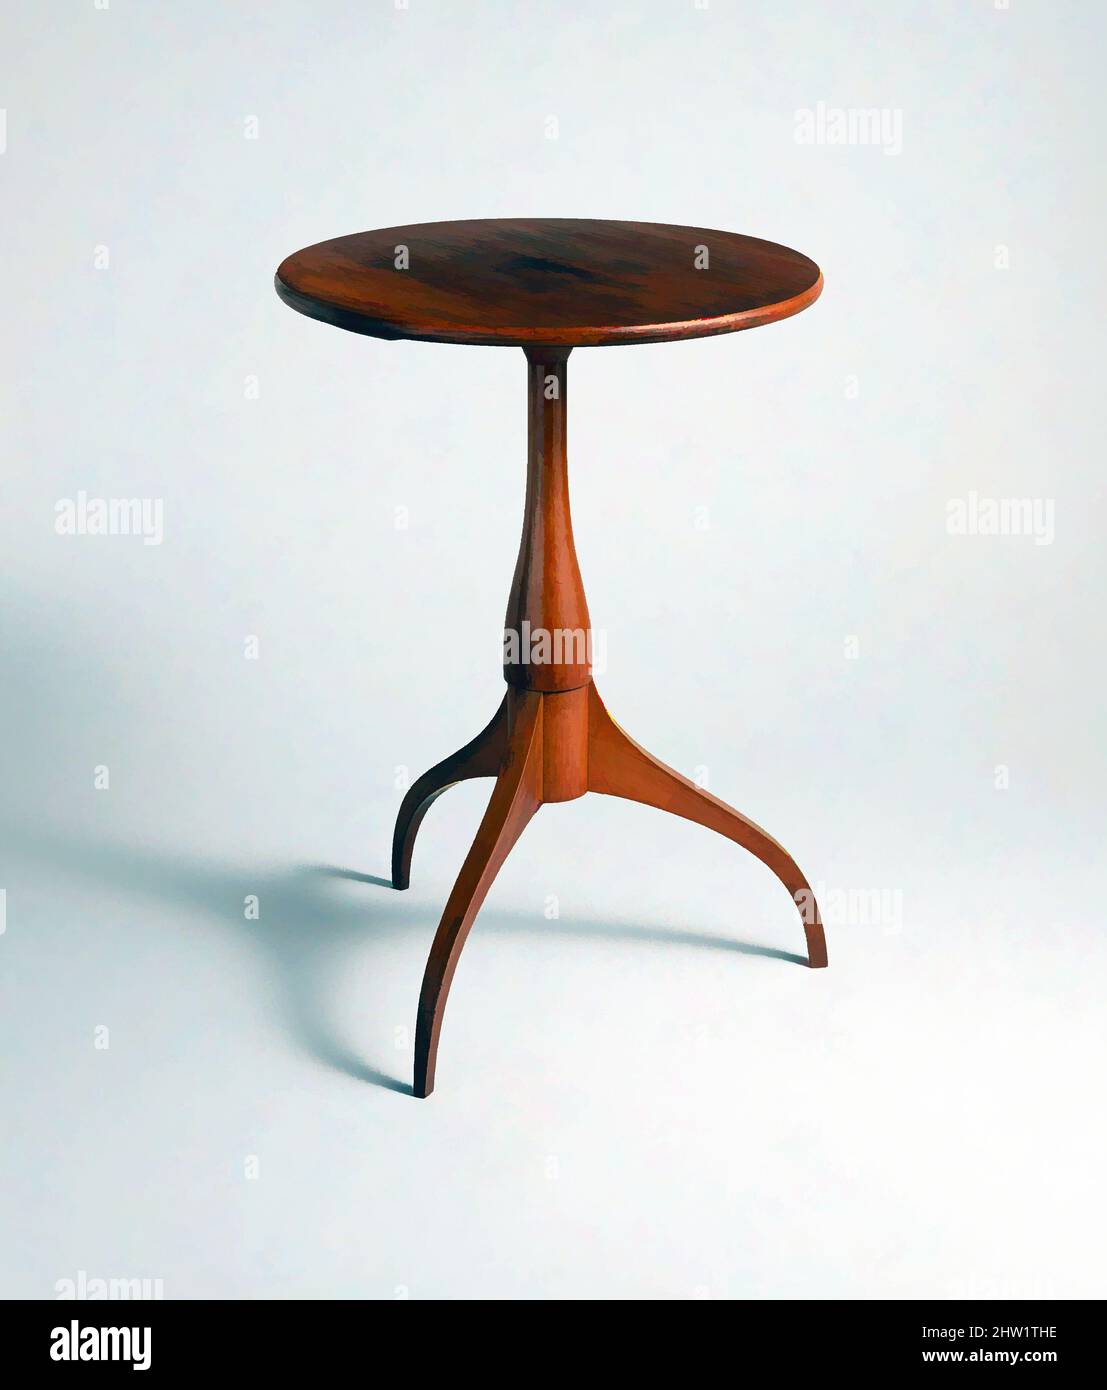 Art inspired by Candle Stand, 1800–1840, Made in New Lebanon, New York, United States, American, Shaker, Cherry, 25 1/2 x 18 x 18 in. (64.8 x 45.7 x 45.7 cm), Furniture, Although several similar stands exist, this example is one of the finest known. Note the elongated 'wine-bottle, Classic works modernized by Artotop with a splash of modernity. Shapes, color and value, eye-catching visual impact on art. Emotions through freedom of artworks in a contemporary way. A timeless message pursuing a wildly creative new direction. Artists turning to the digital medium and creating the Artotop NFT Stock Photo